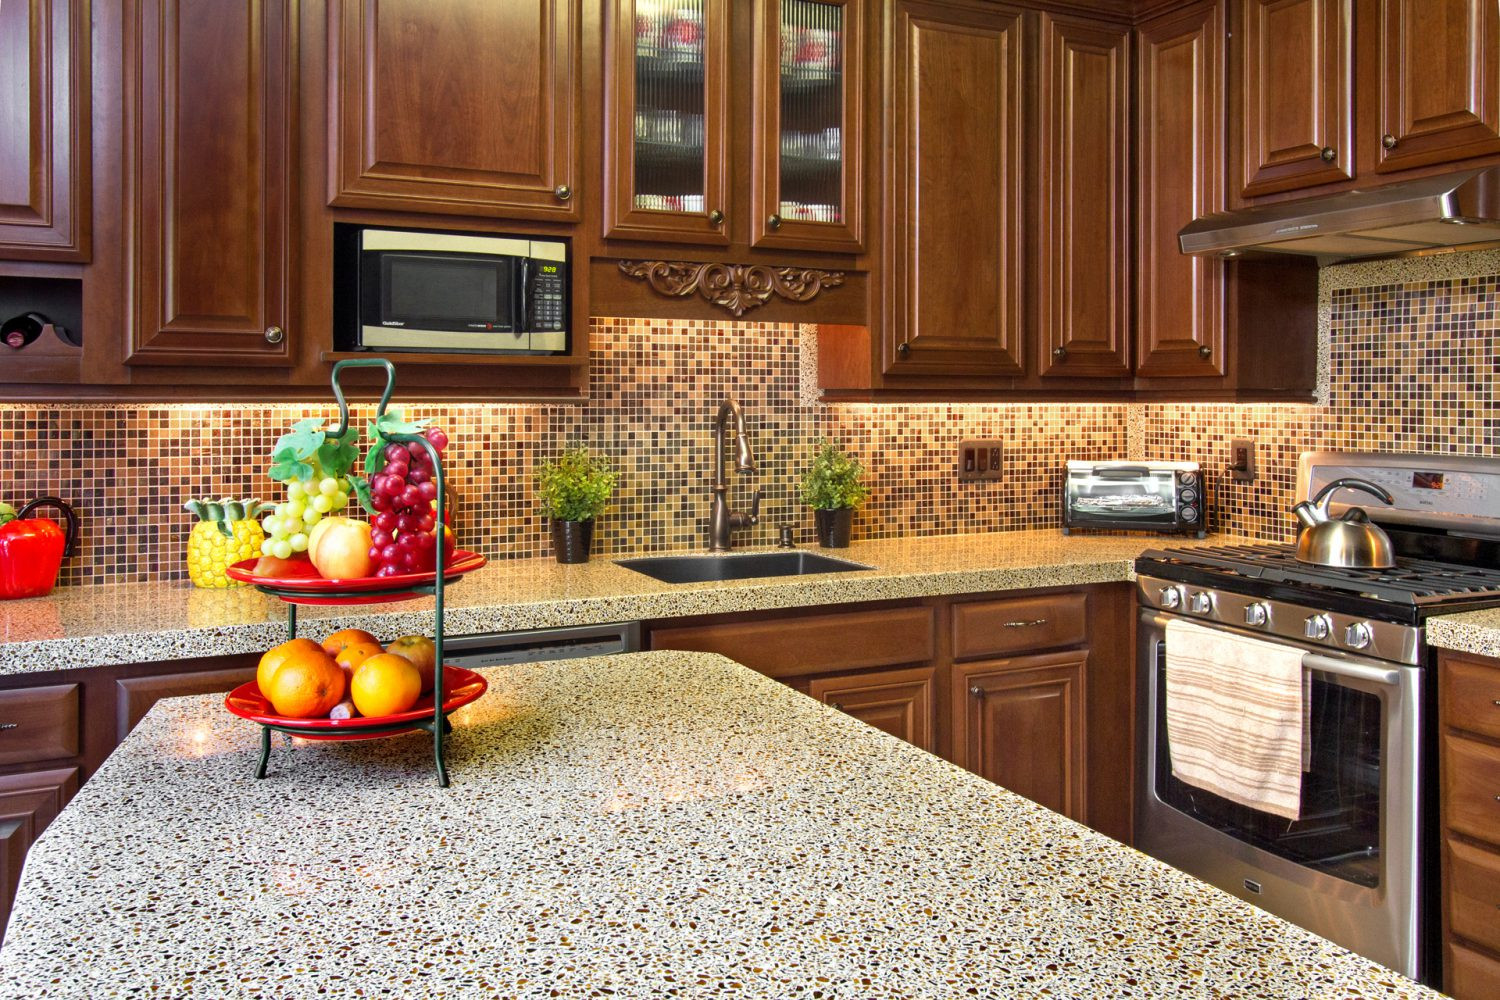 Kitchen Countertop Decor Ideas
 50 Best Kitchen Countertops Options You Should See